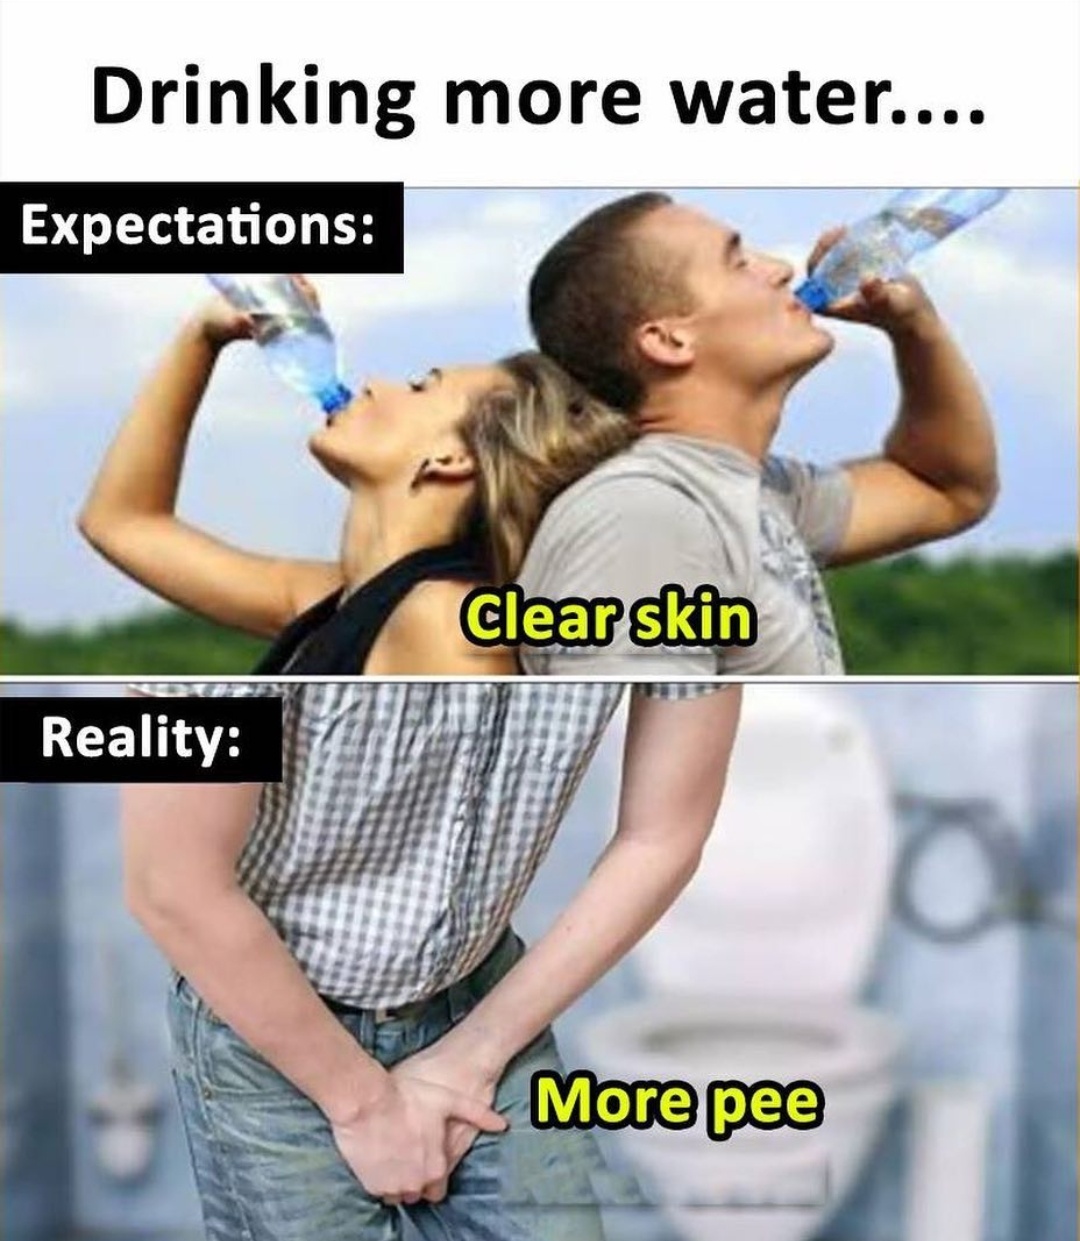 memes - sarcasm meme - Drinking more water.... Expectations Clear skin Reality More pee